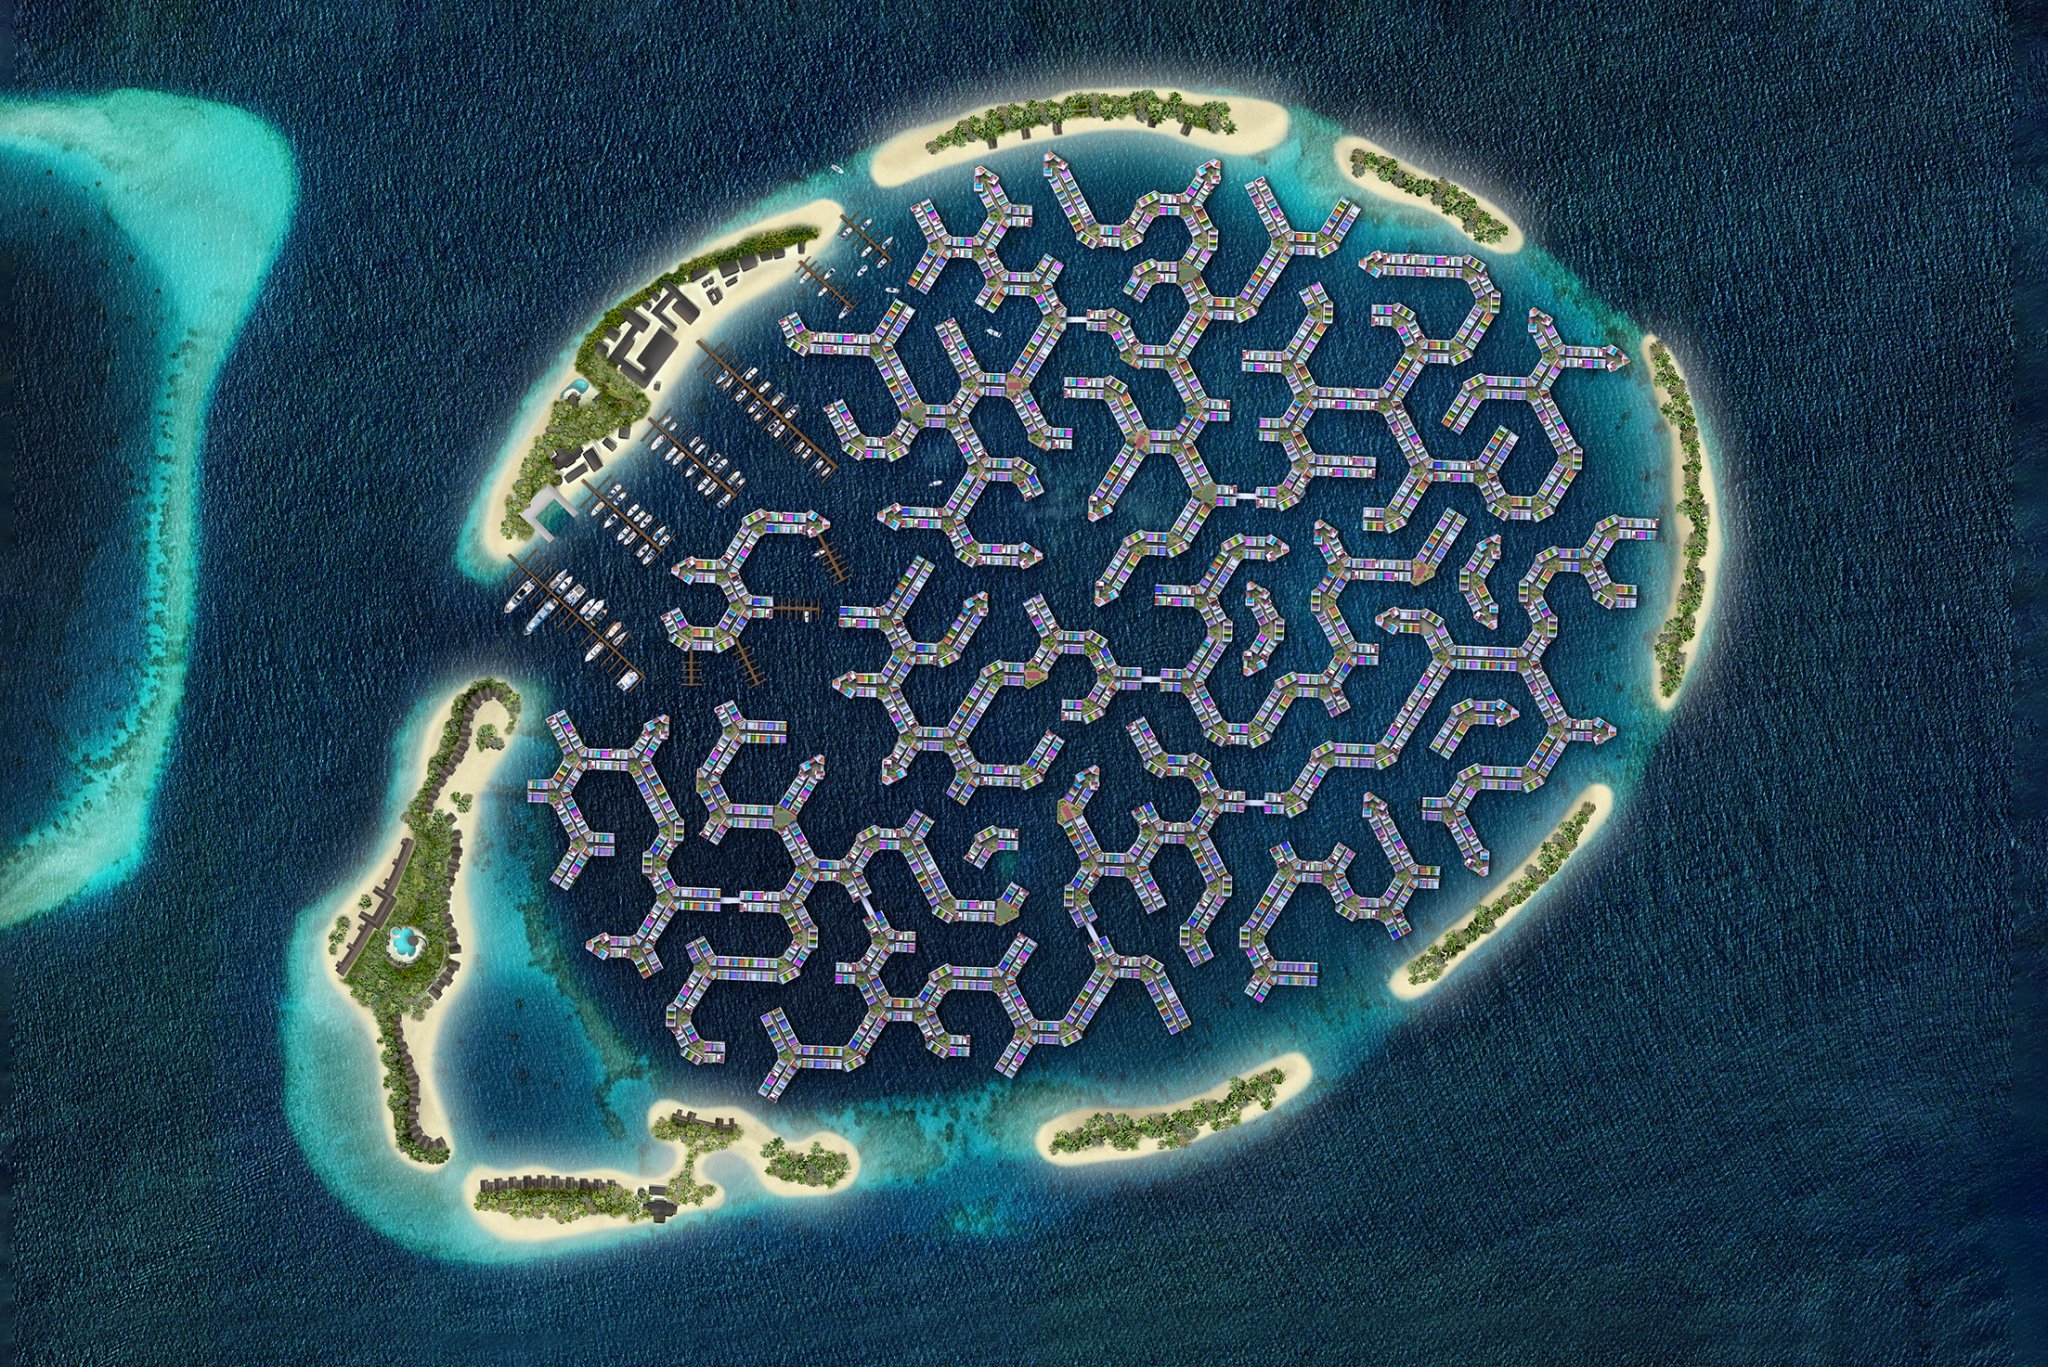 This is what the Maldives Floating City of the future will look like